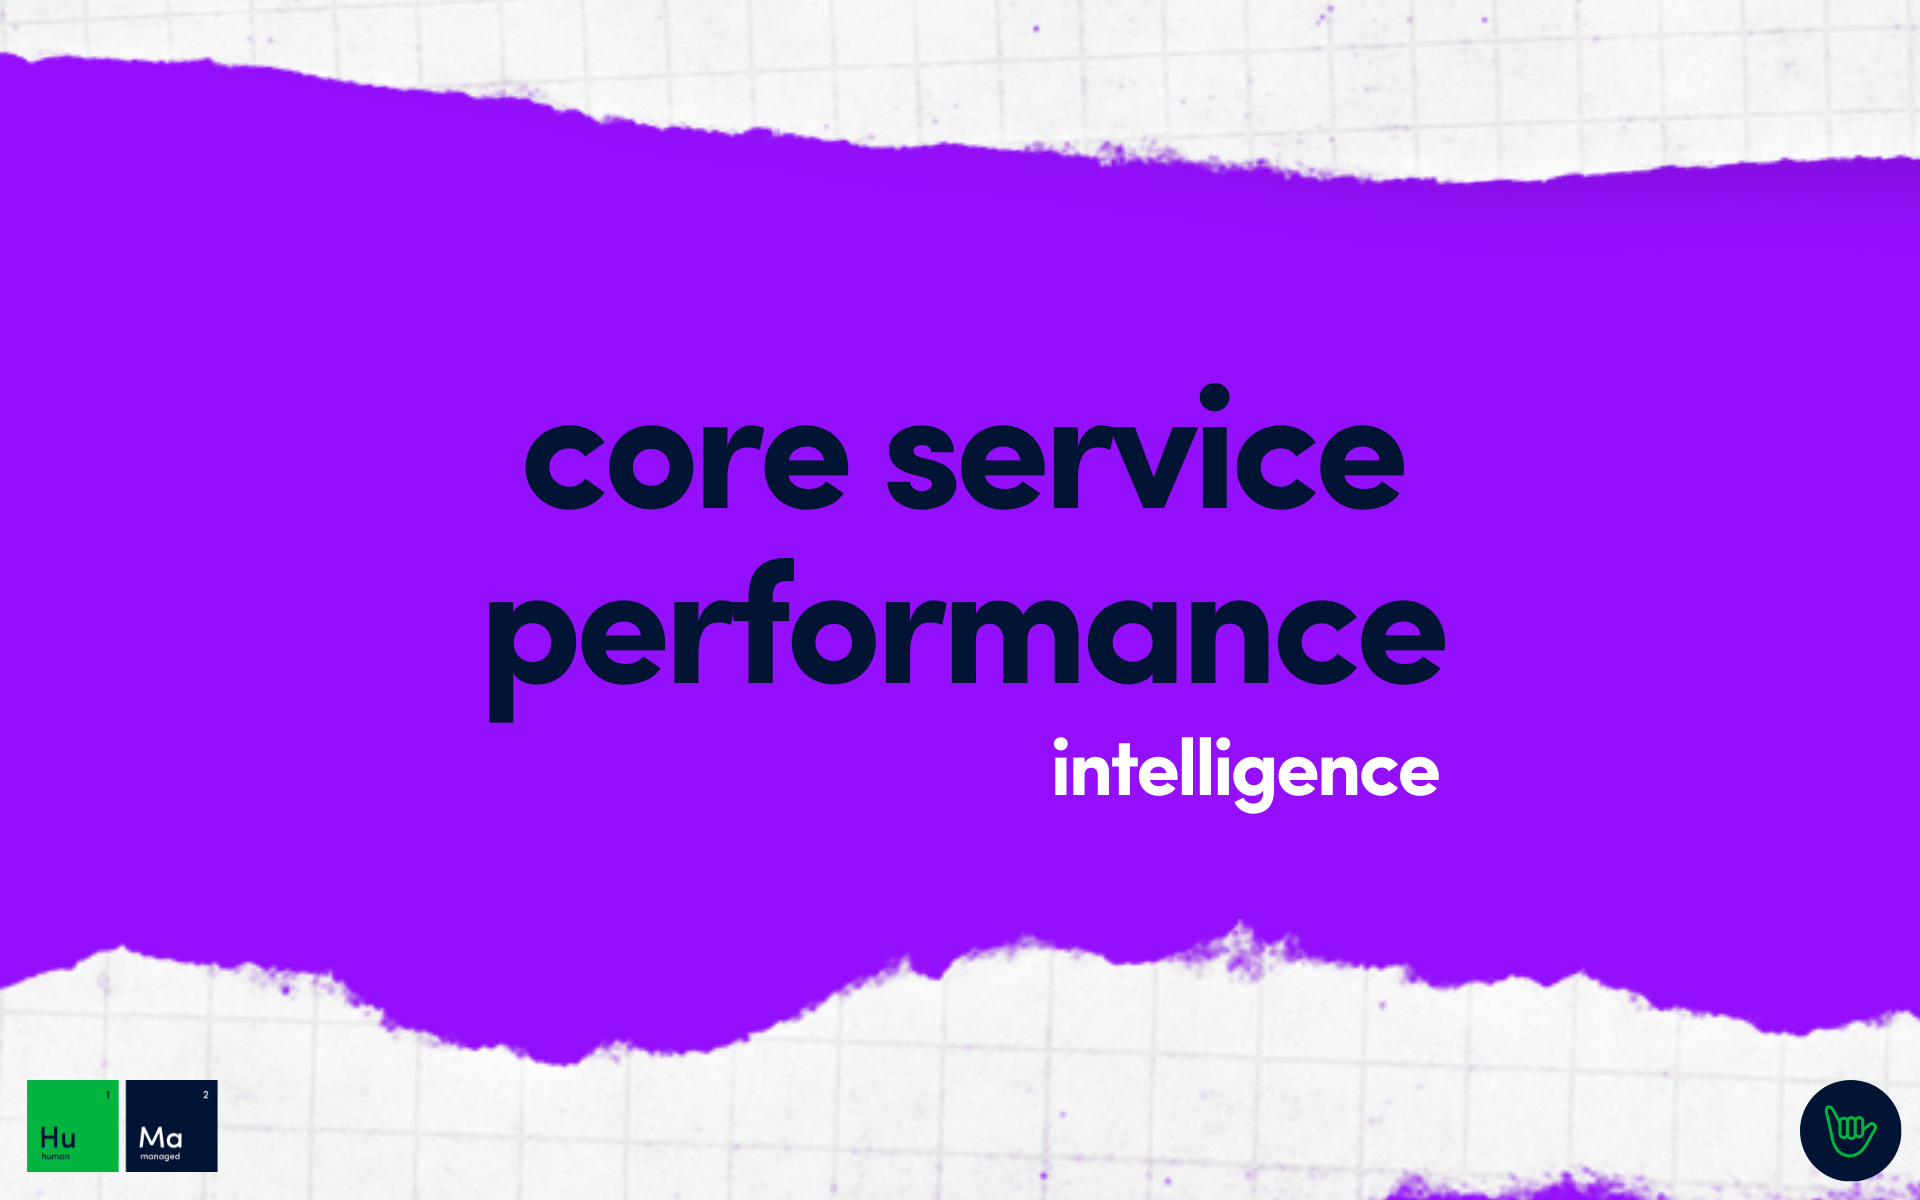 Case Study: driving service performance with intelligence from data